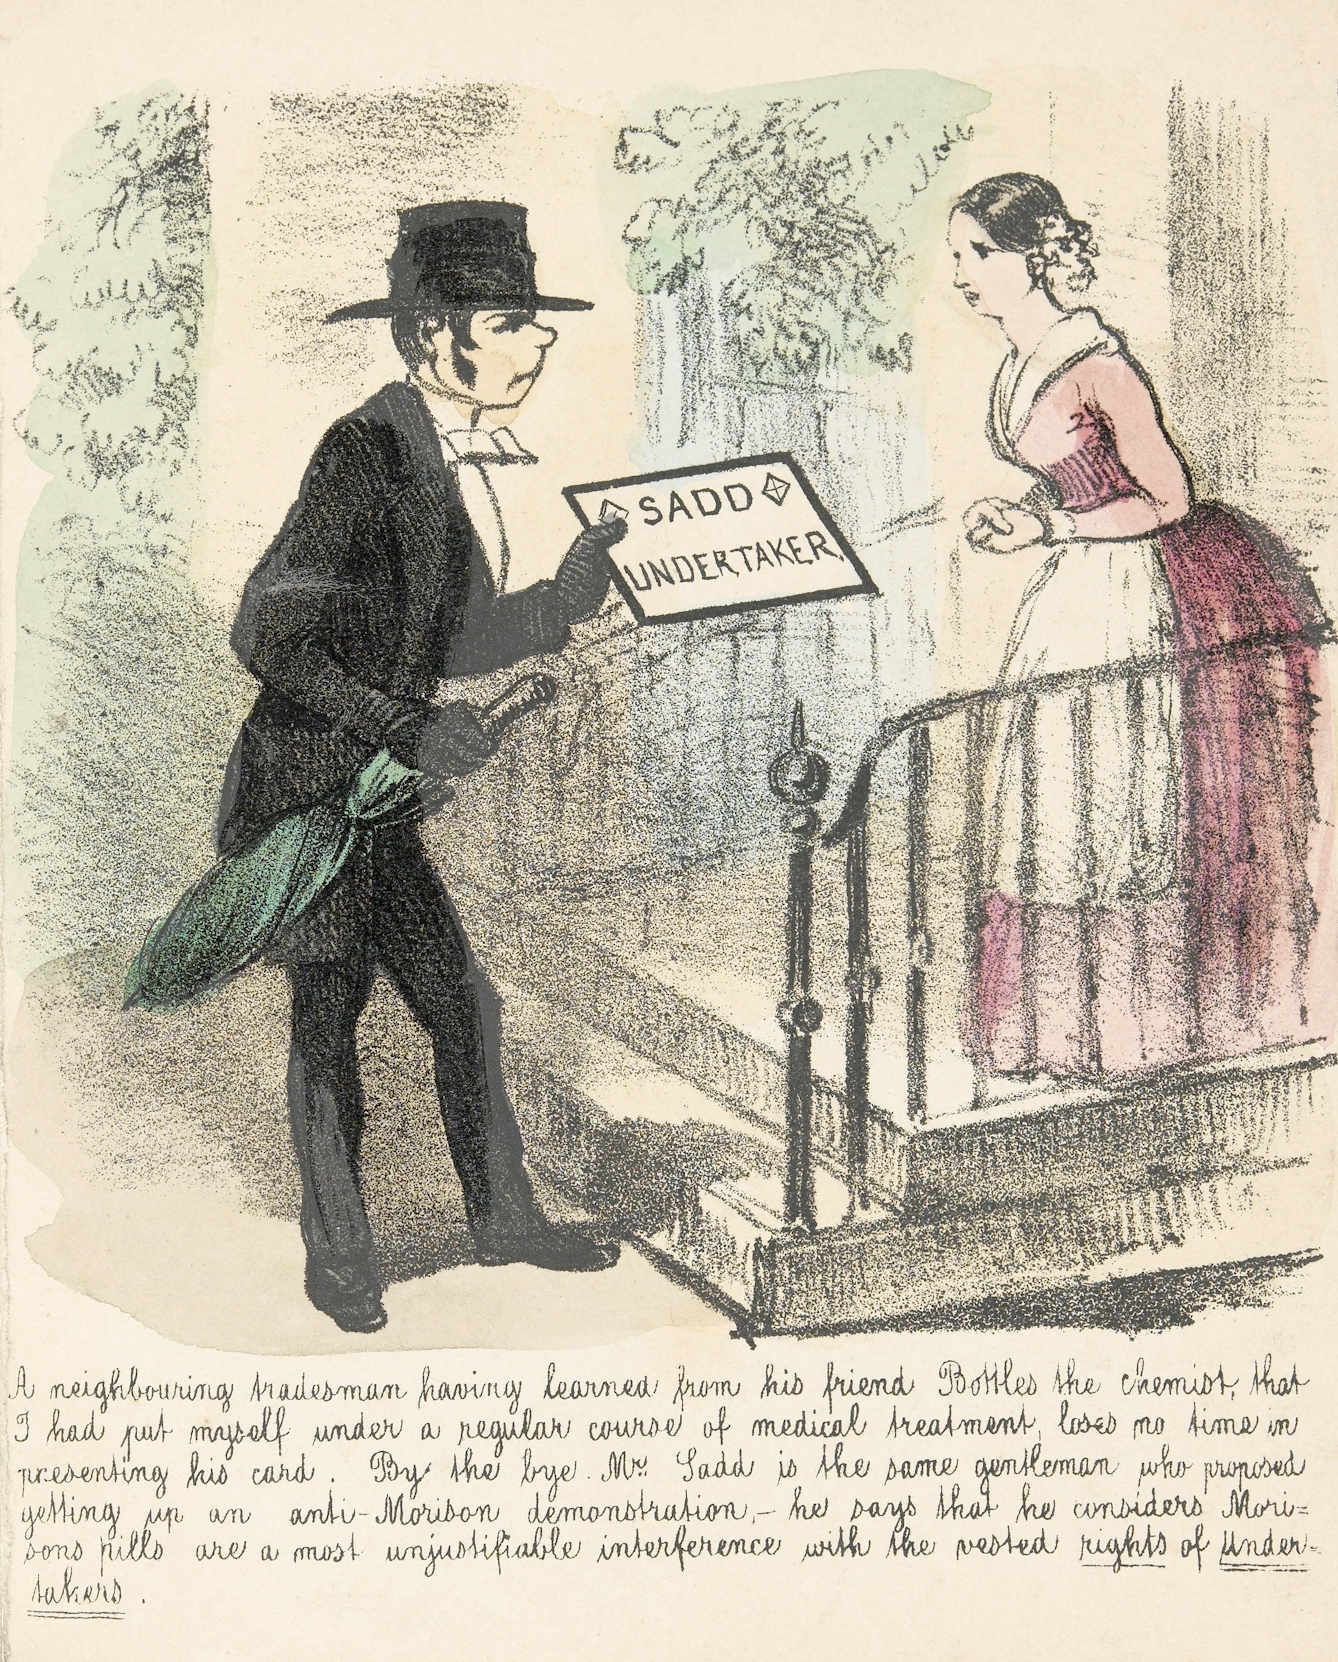 An undertaker delivers his business card to a house where a patient is being treated with many drugs.